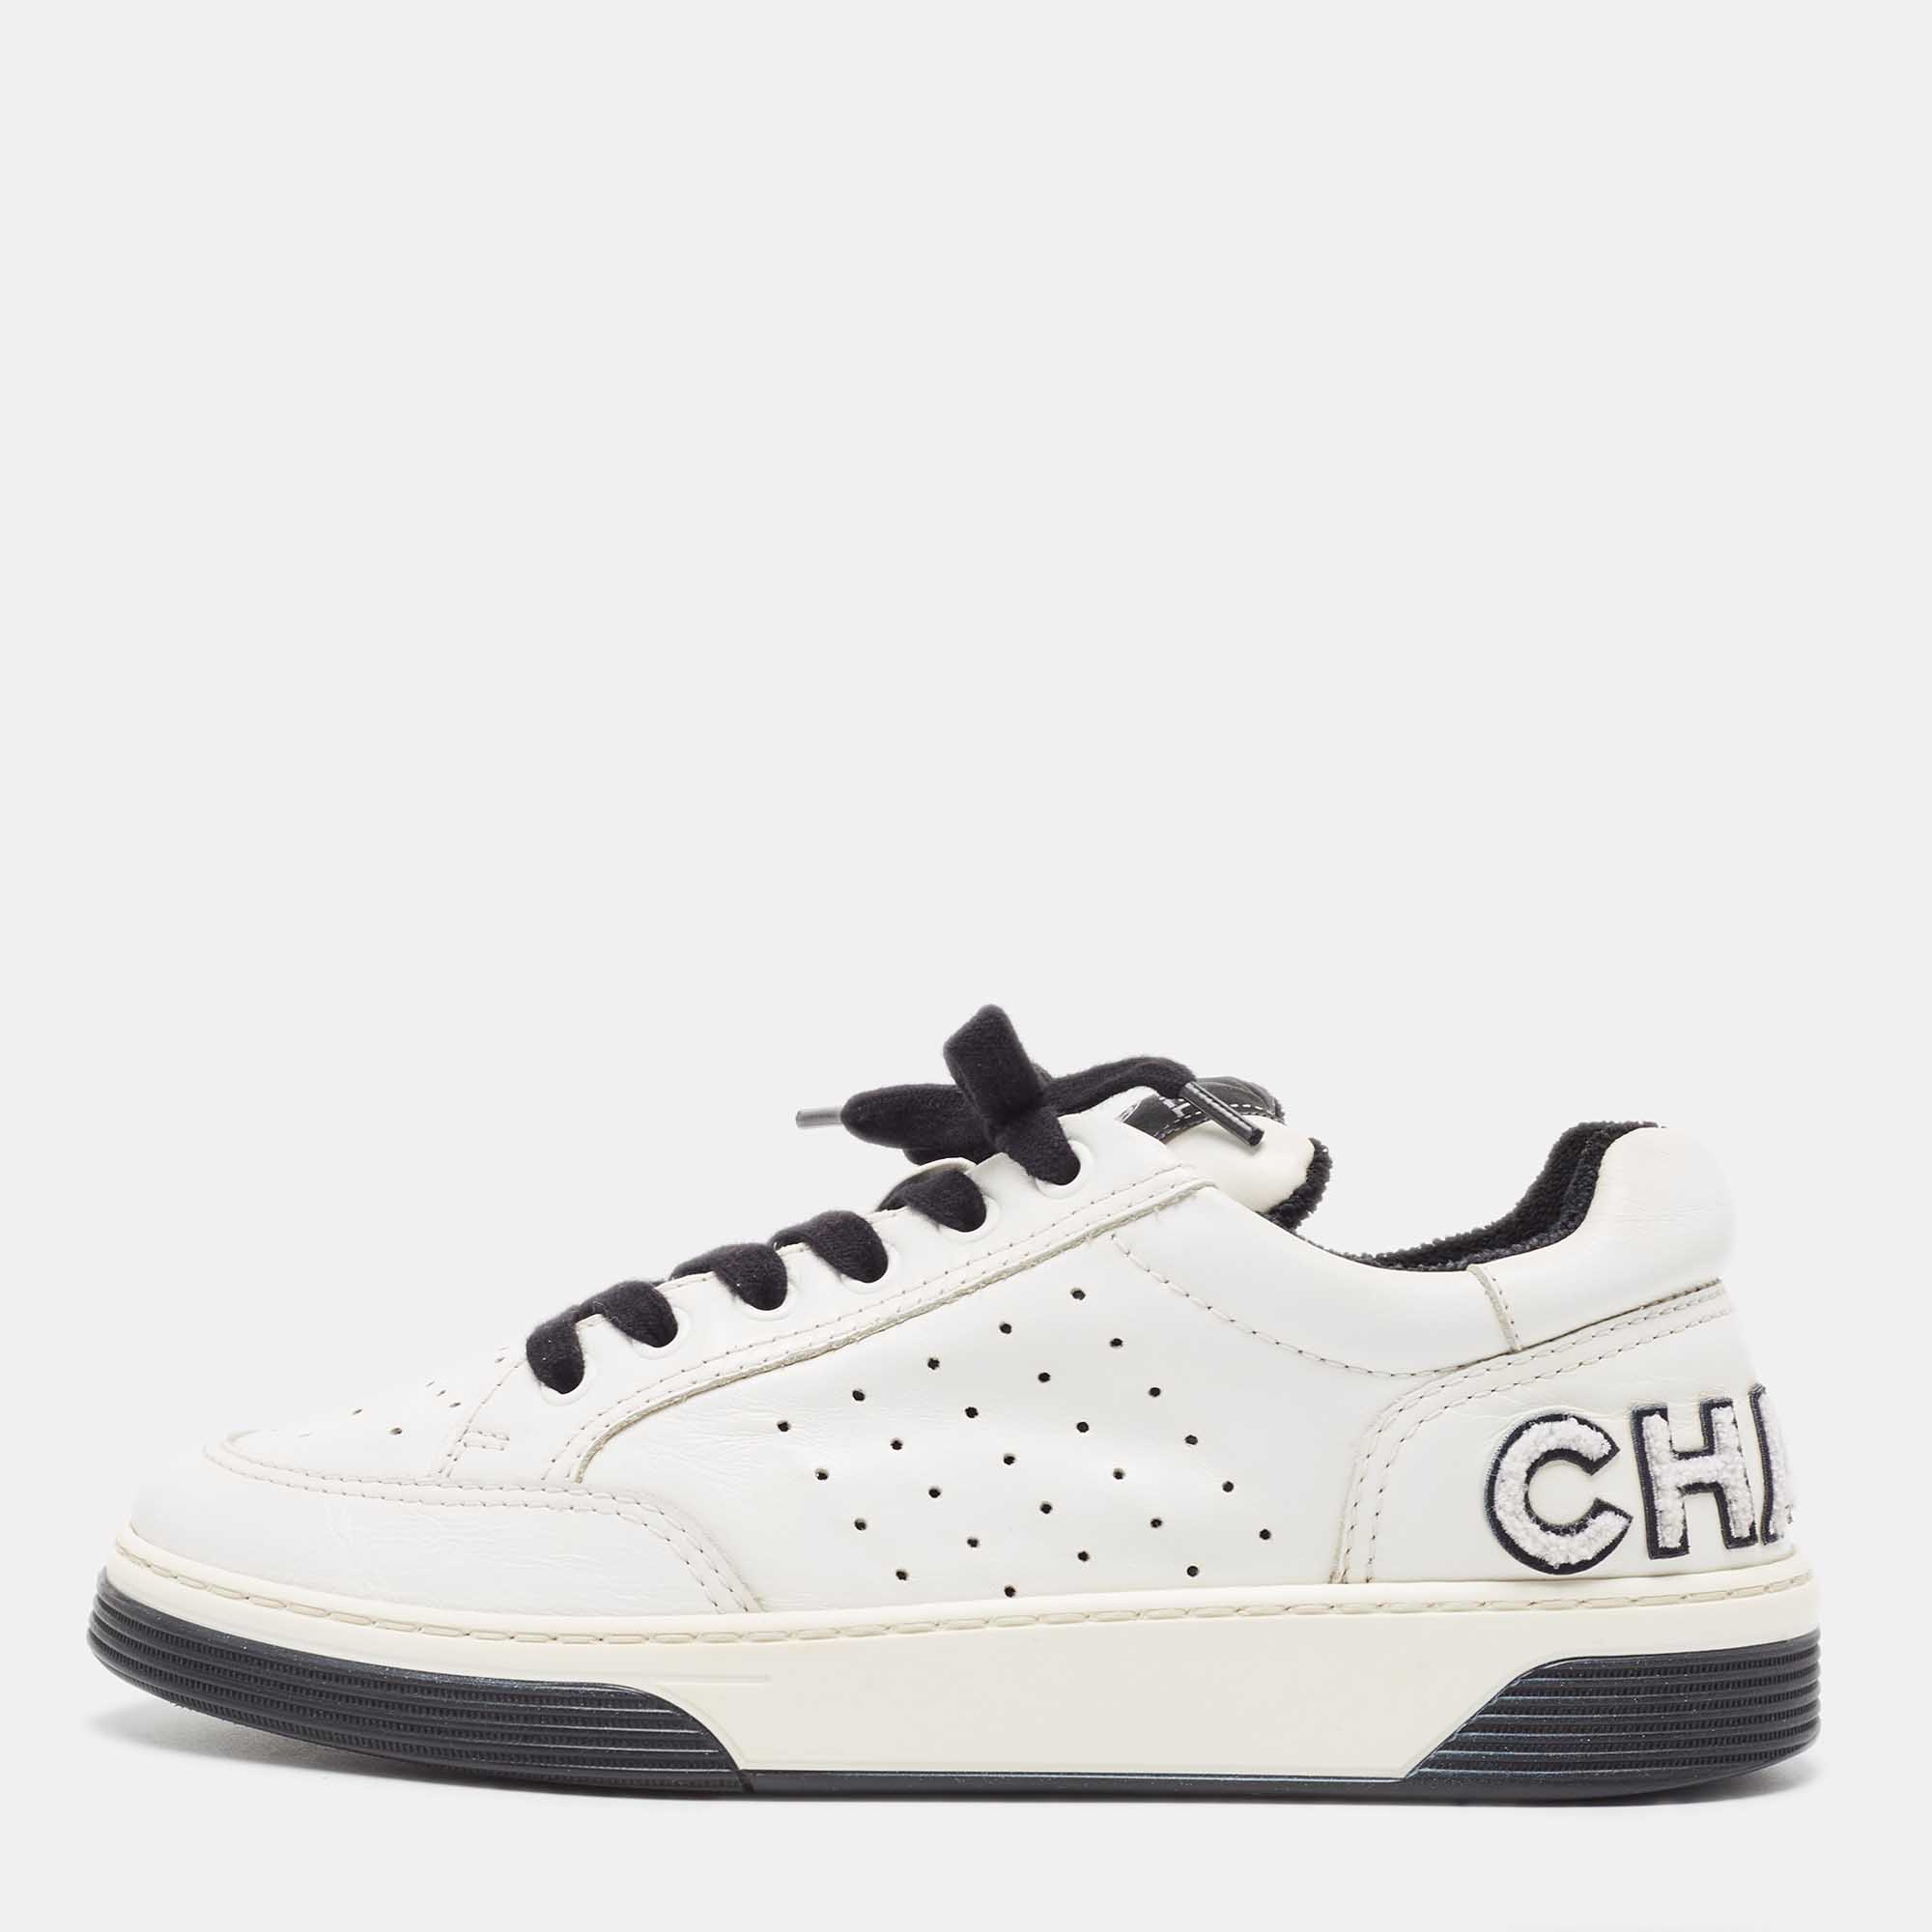 Chanel White Perforated Leather Logo Low Top Sneakers Size 39